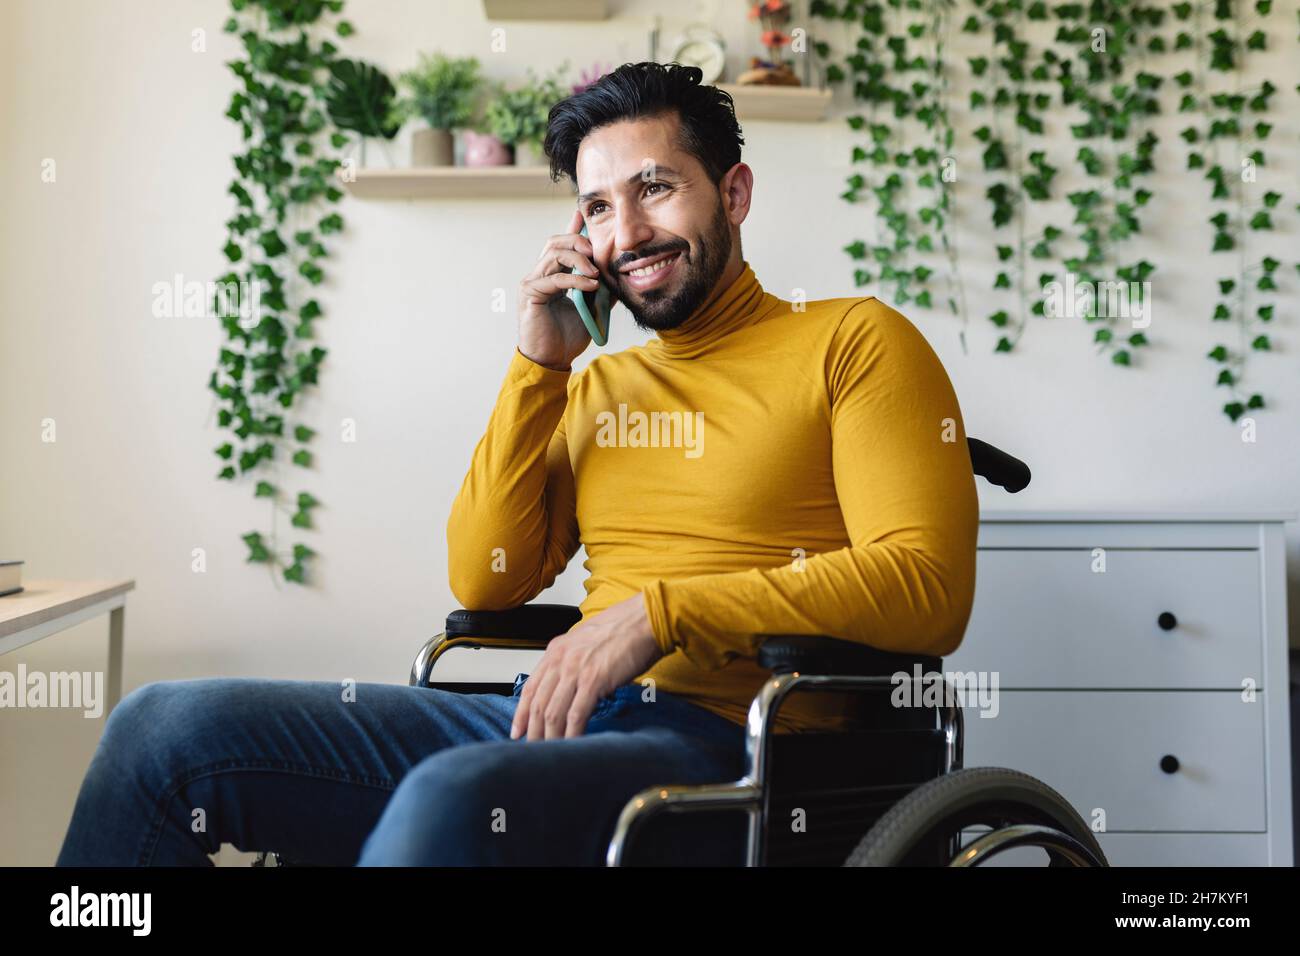 Smiling disable man reading book on wheelchair Stock Photo